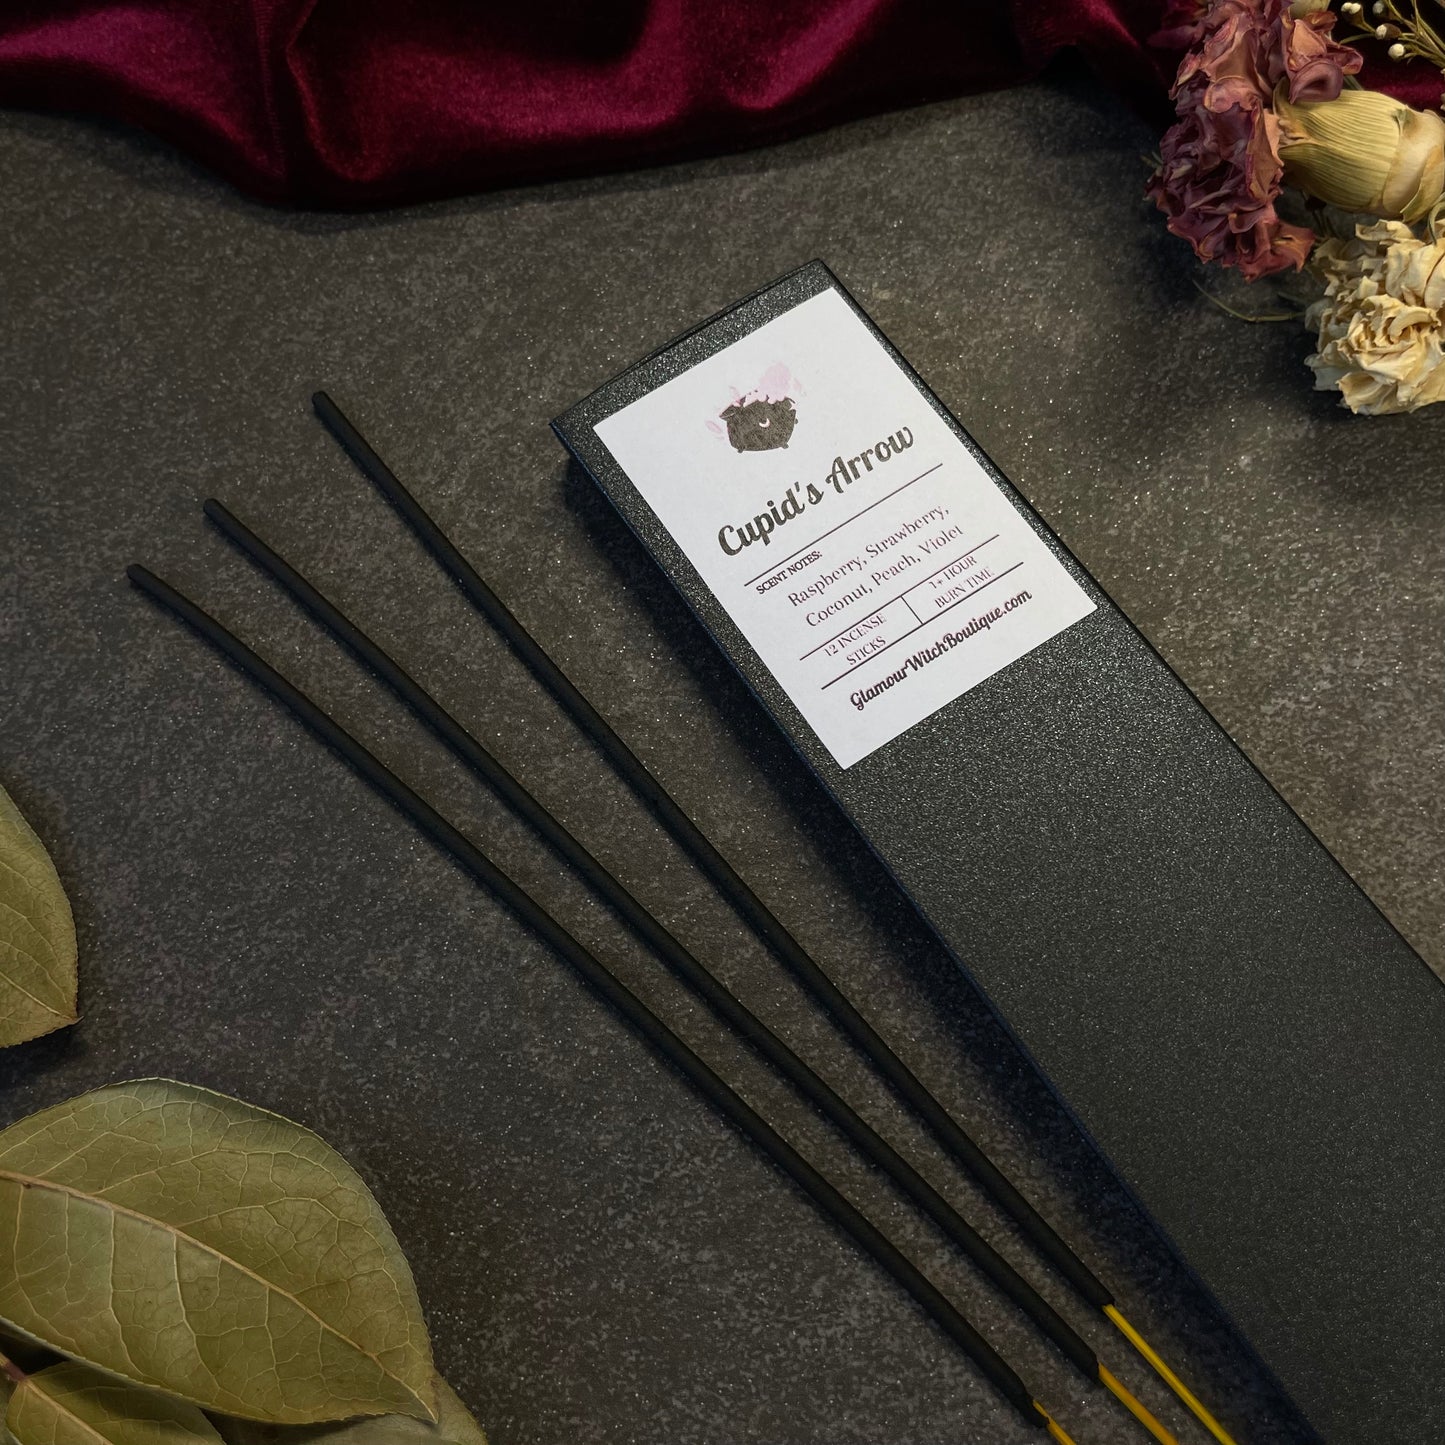 Cupid’s Arrow - Hand Dipped Incense Sticks